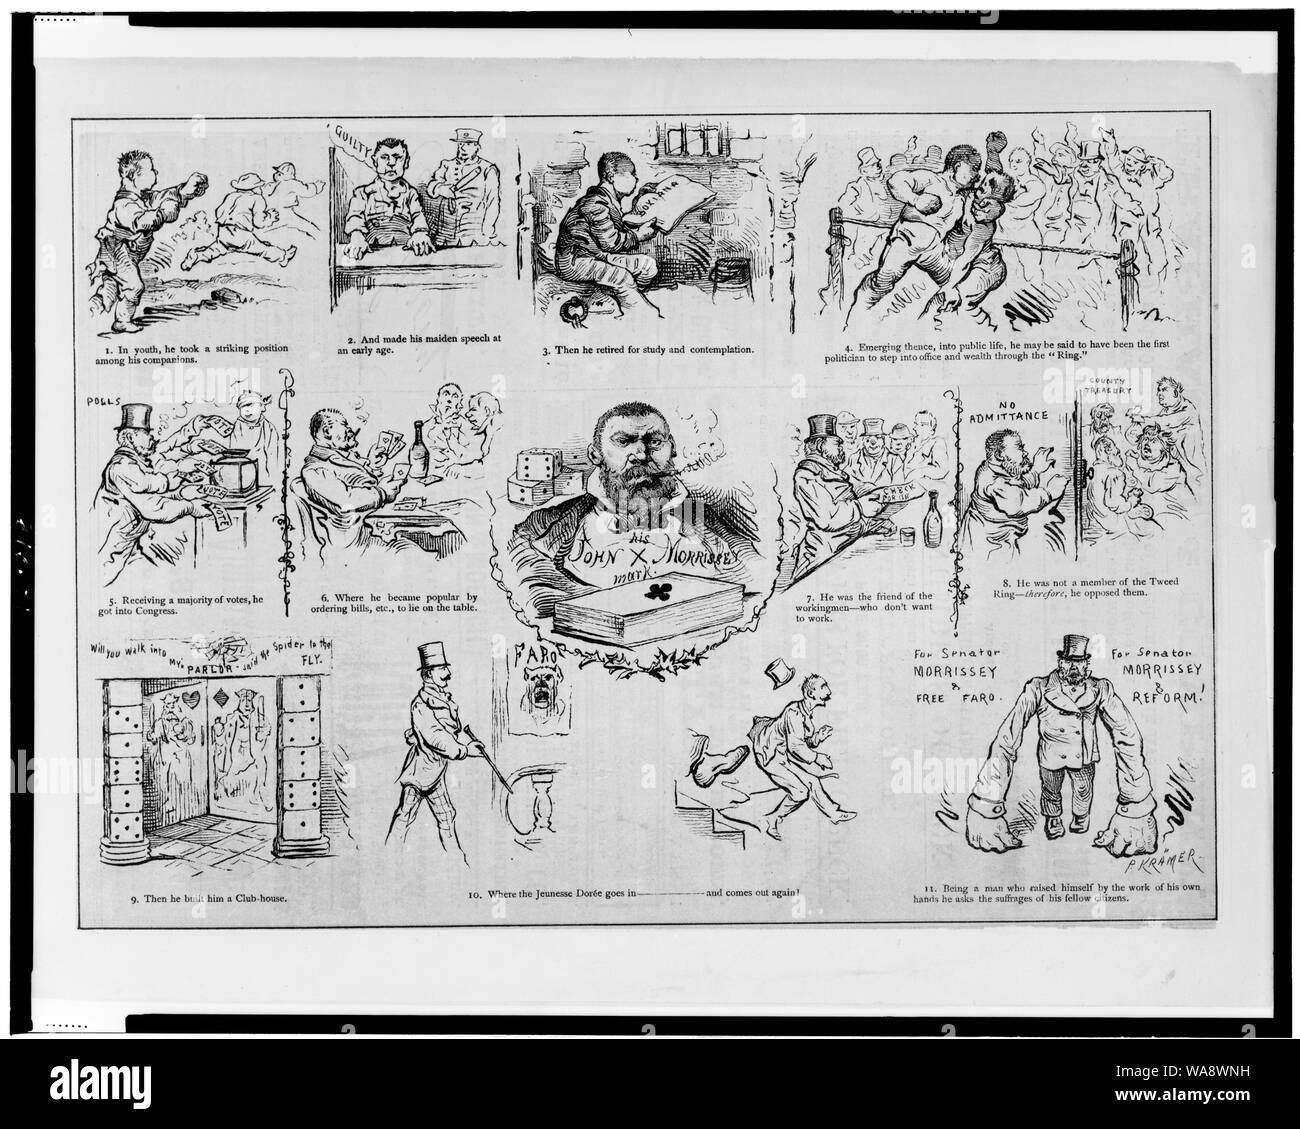 Cartoon depicting scenes in the life of John Morrissey, showing him as a fighter, in jail, as a politician, etc.] / P. Kramer Stock Photo